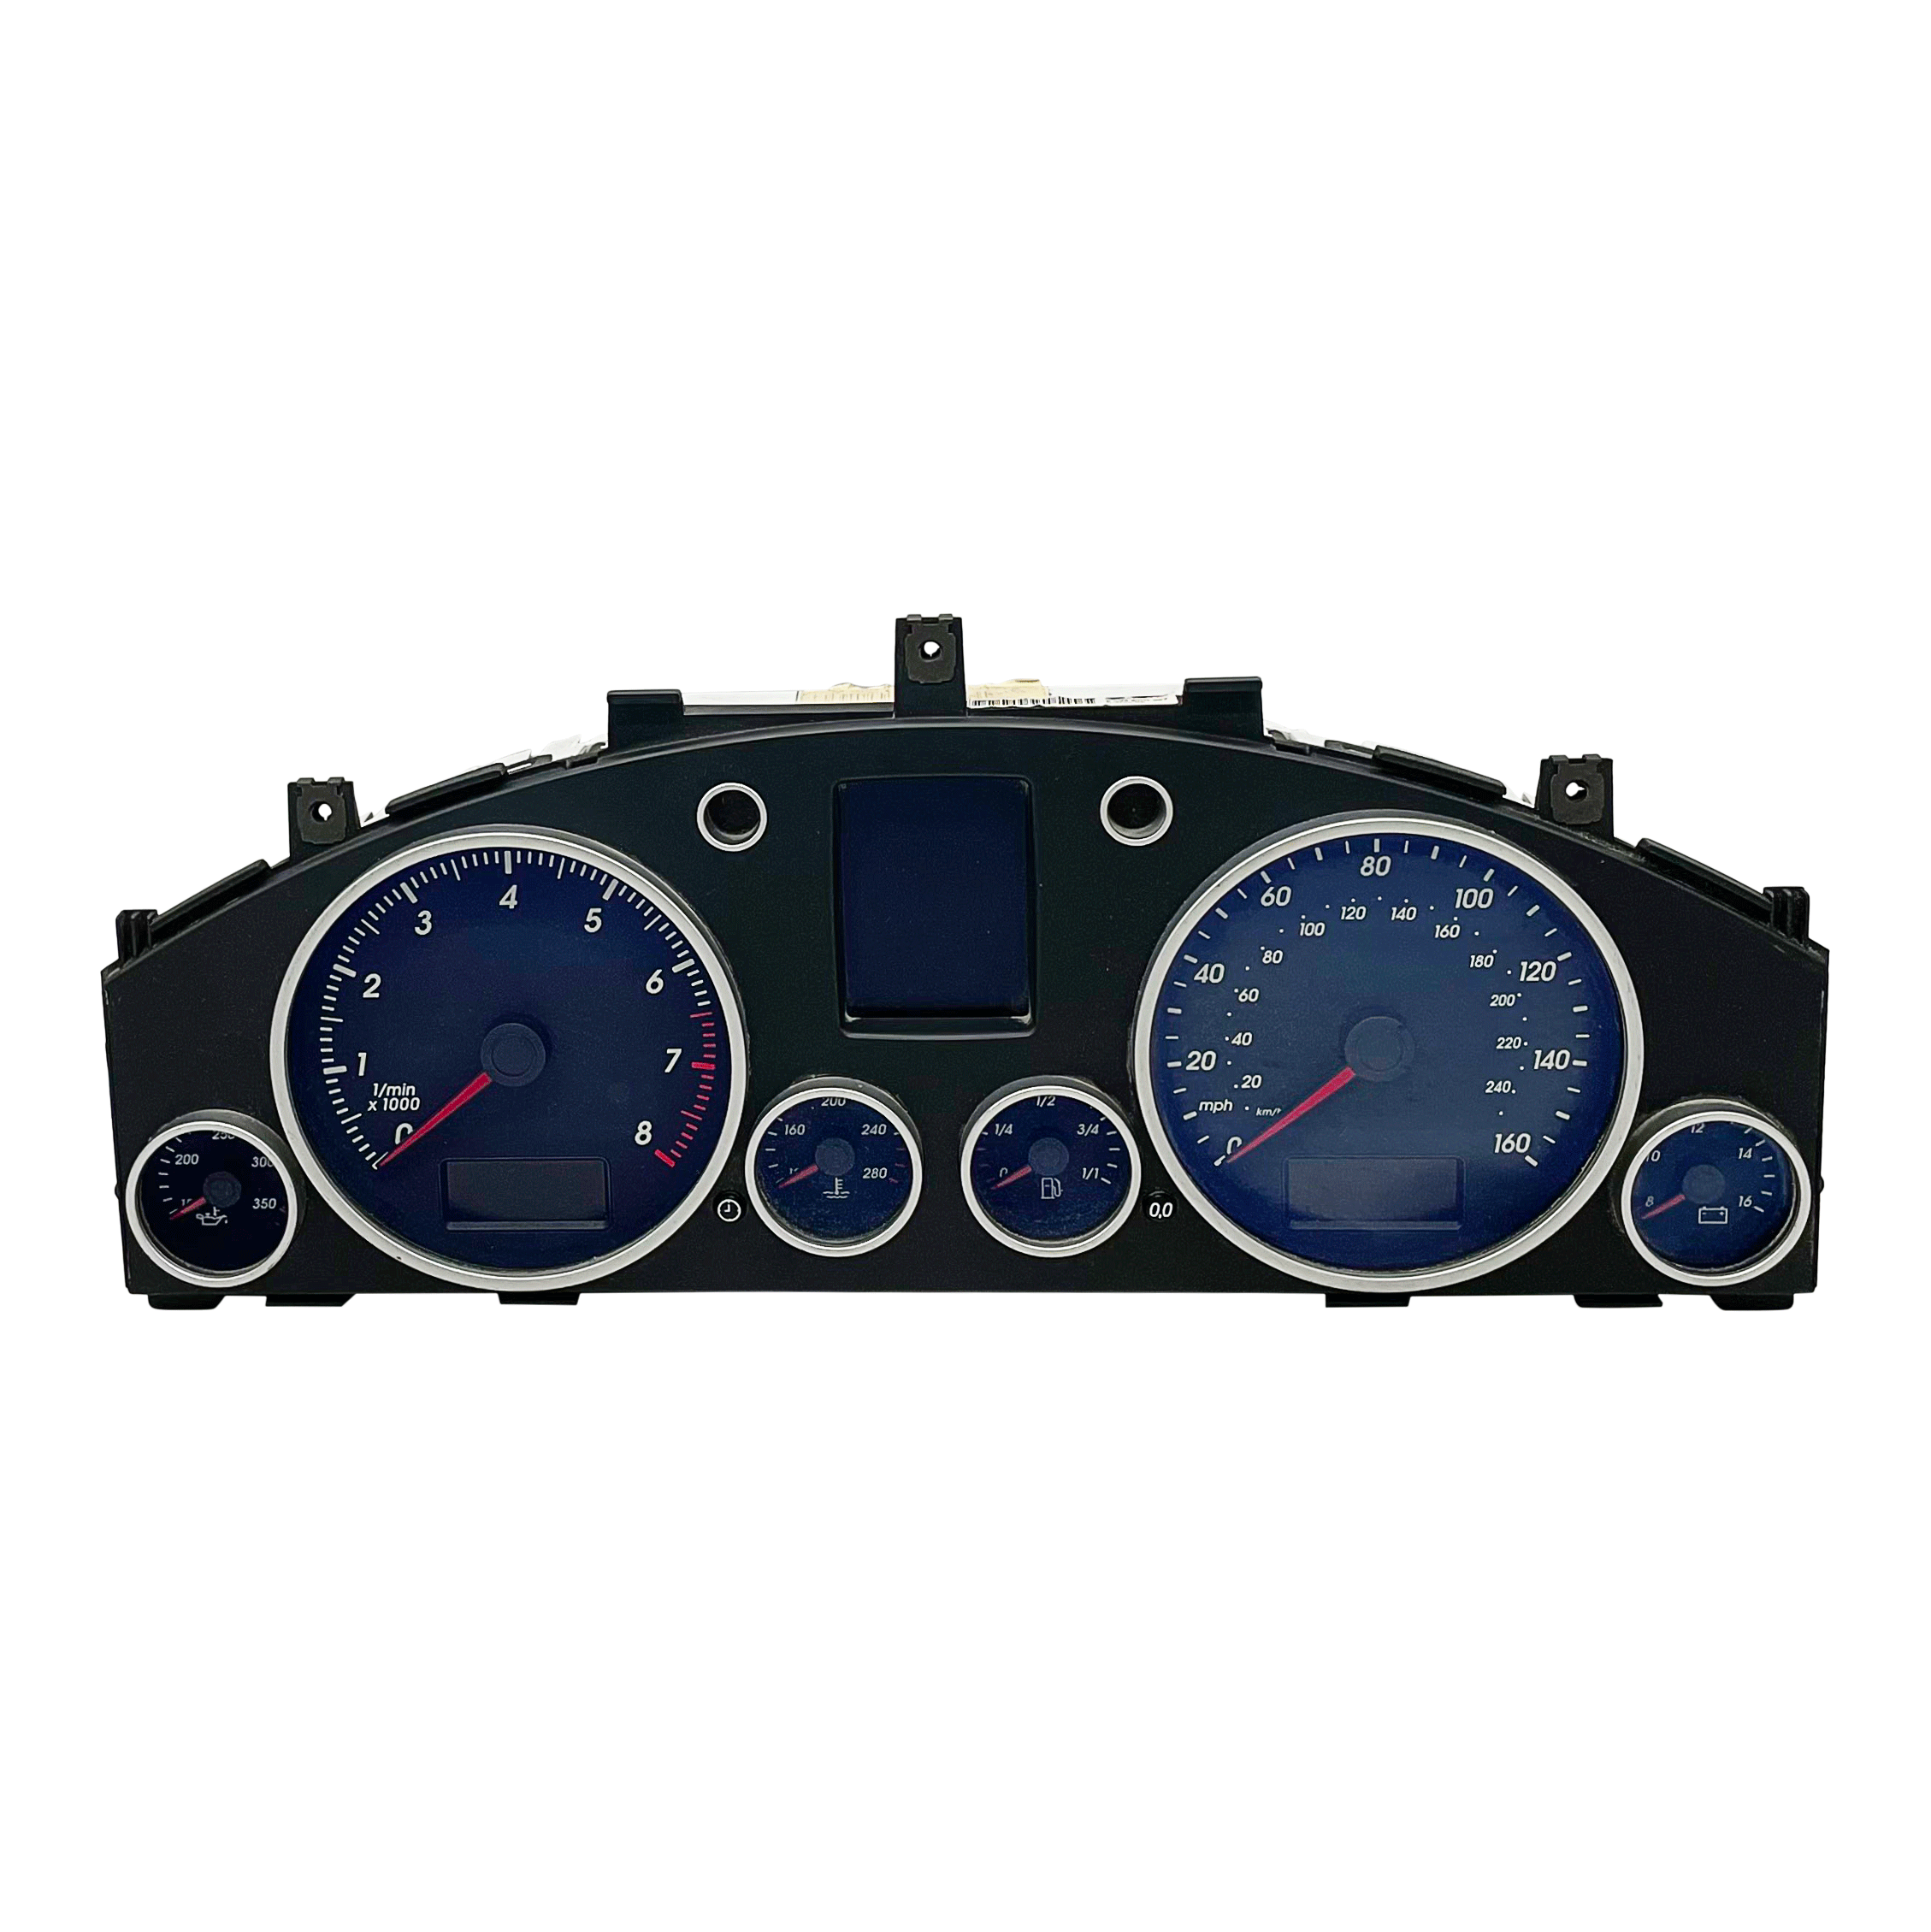 2004-2006 Volkswagen TOUAREG Used Instrument Cluster For Sale